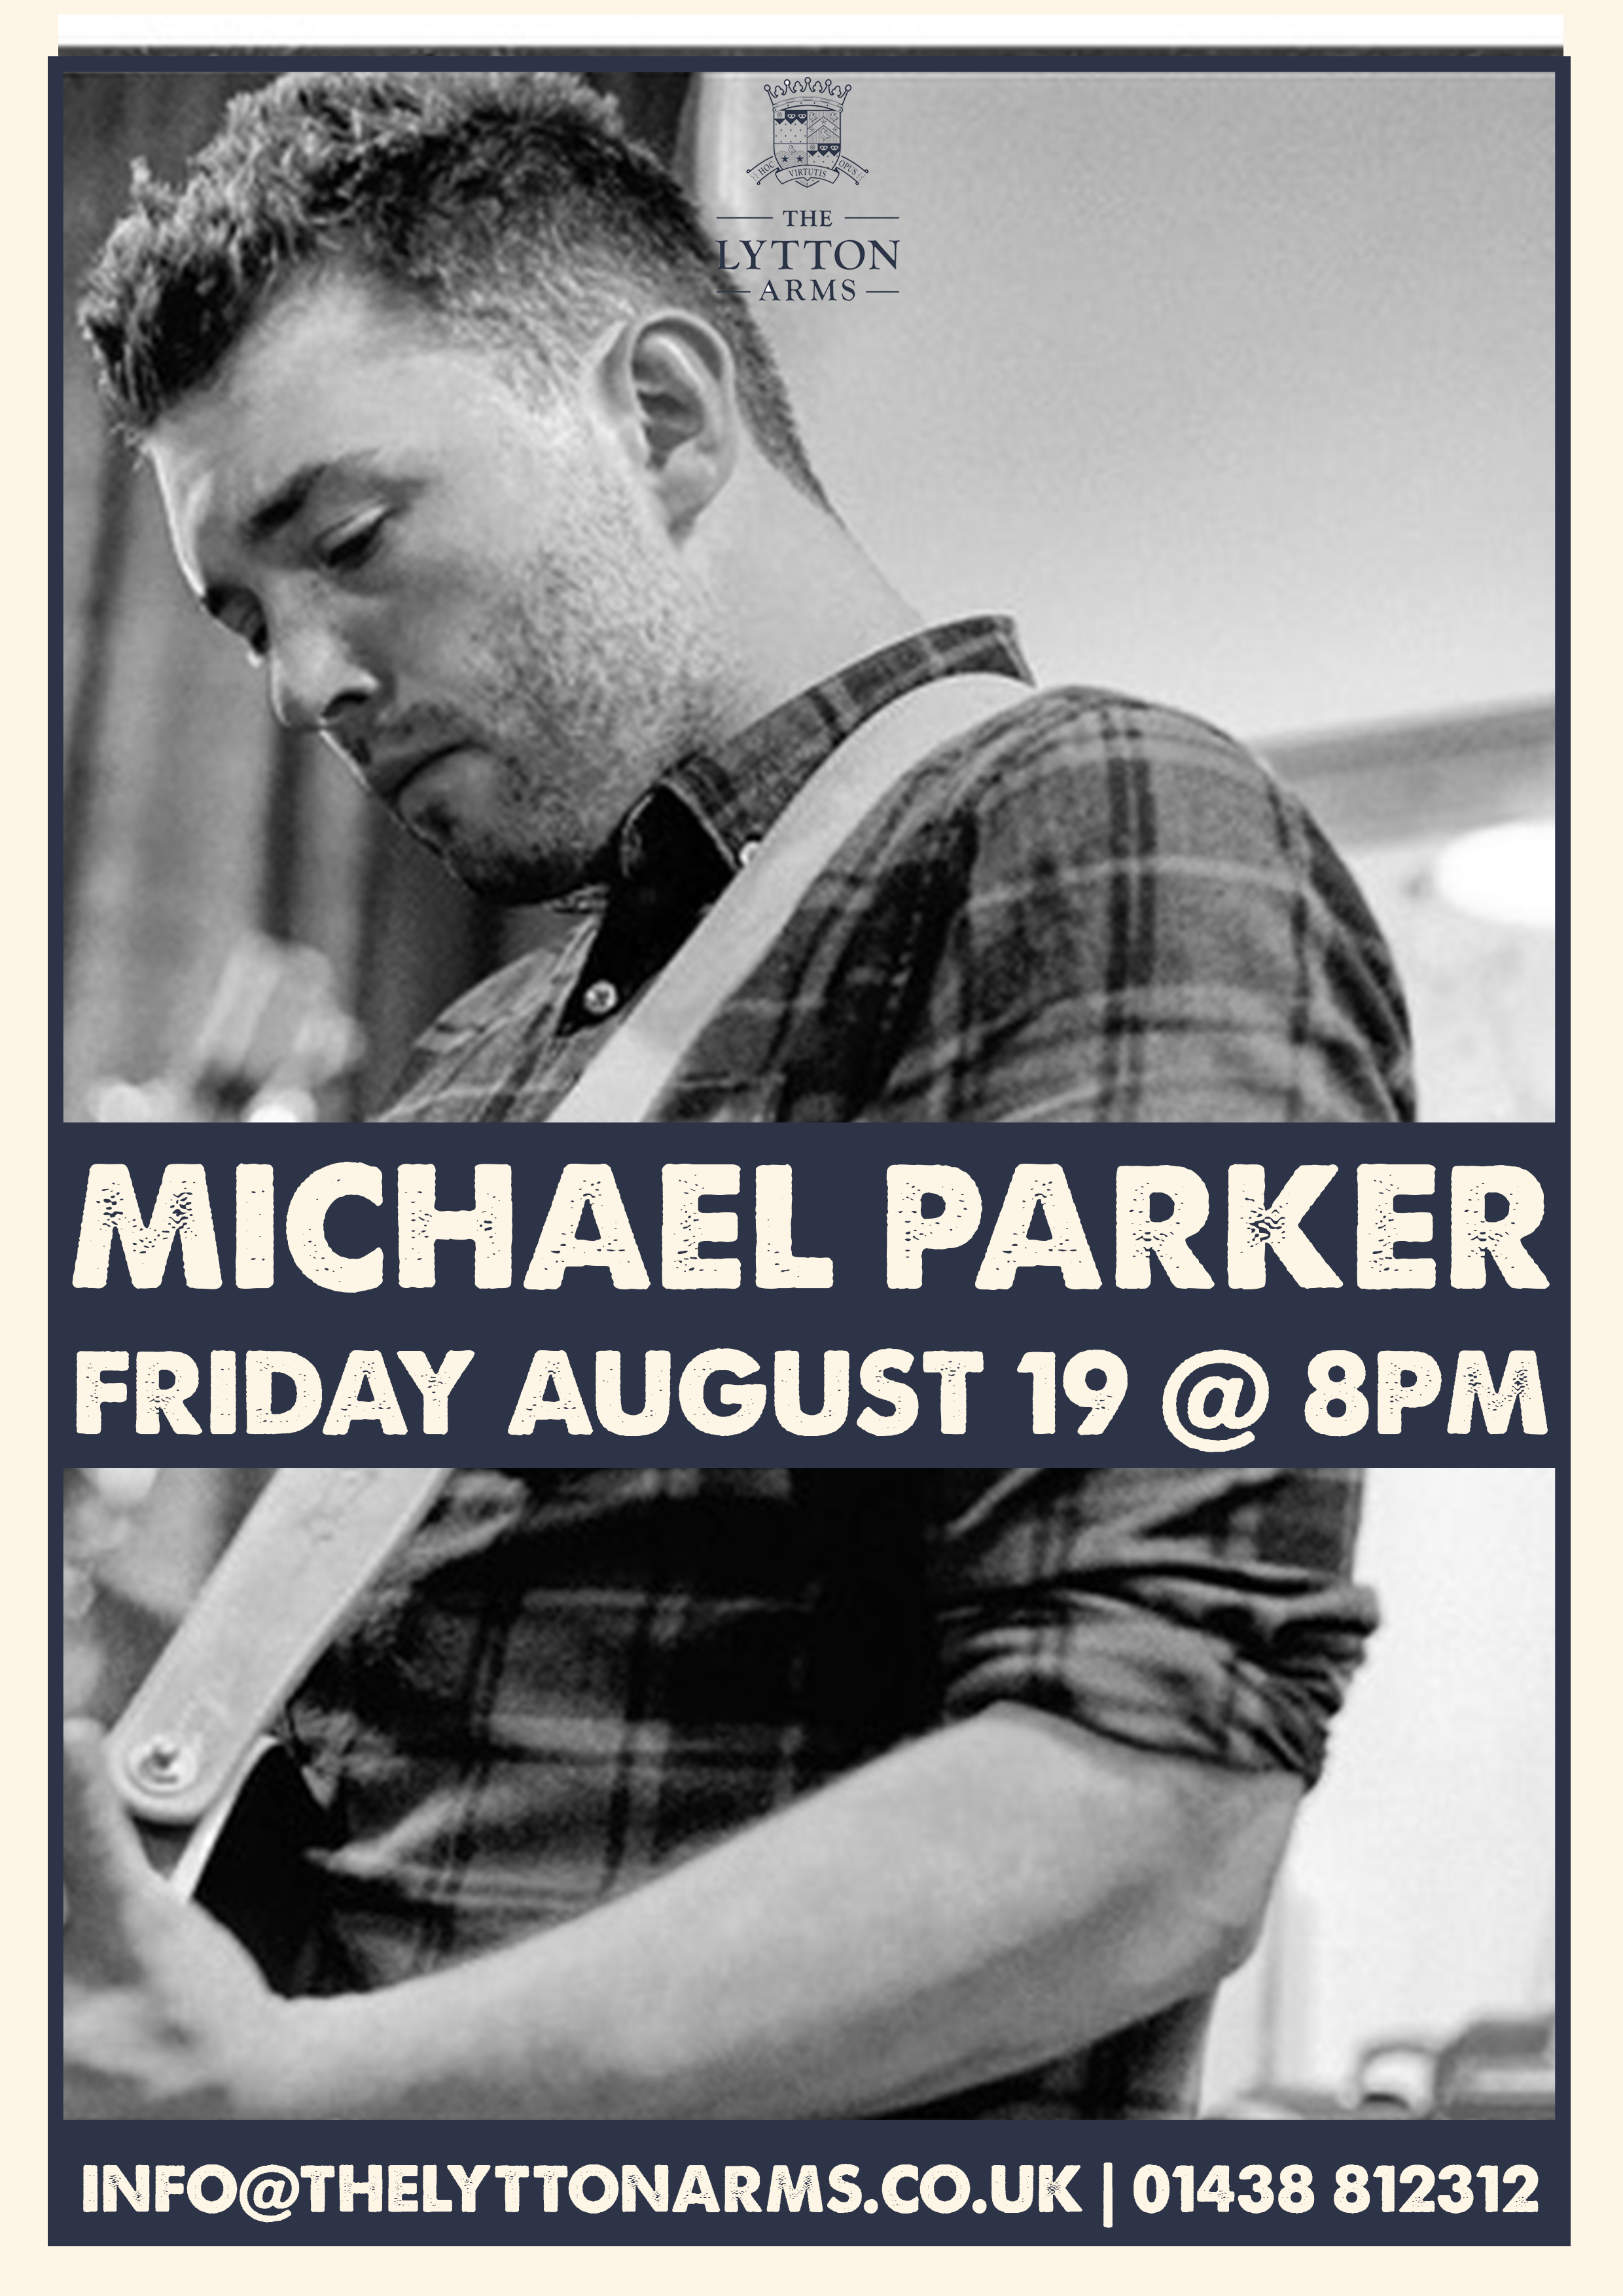 Live at The Lytton - Michael Parker - August 19th